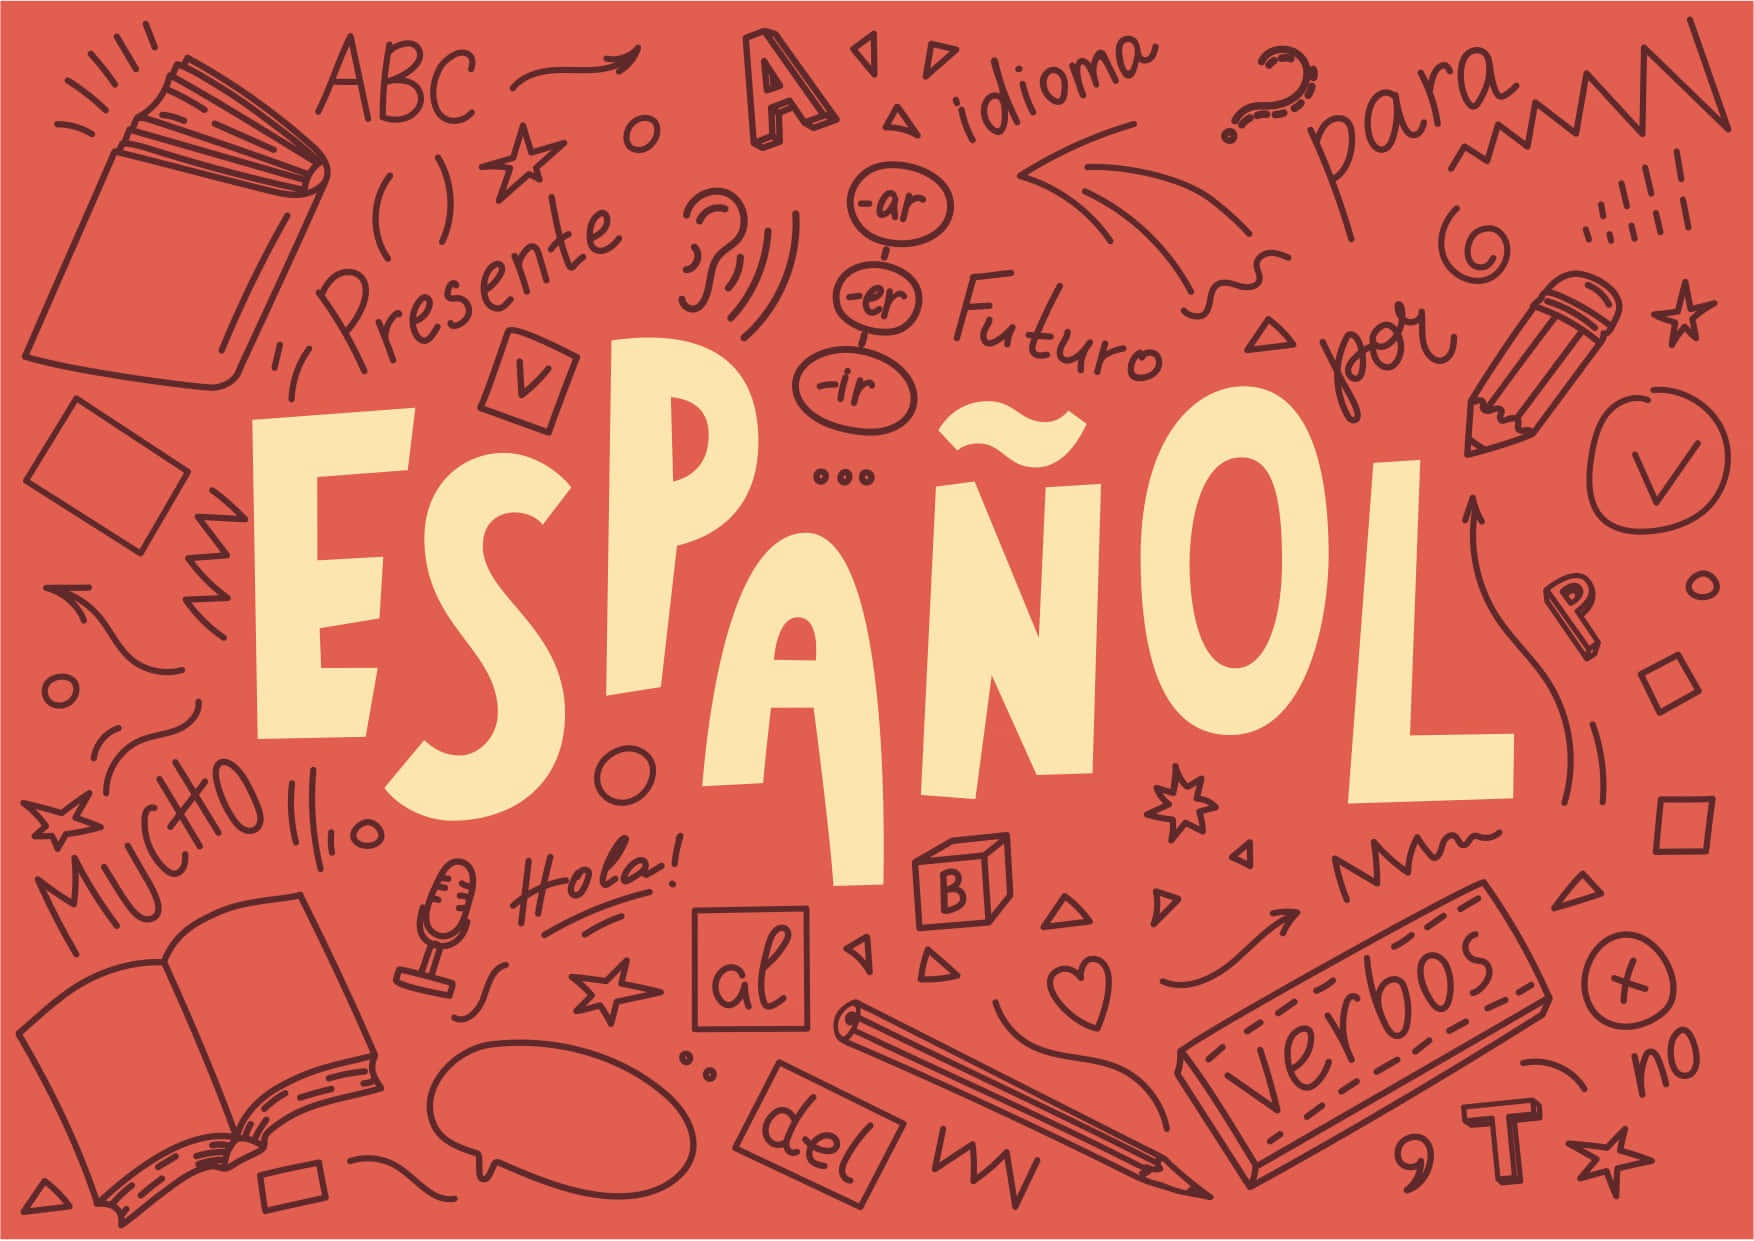 Spanish Word With Doodles And Symbols